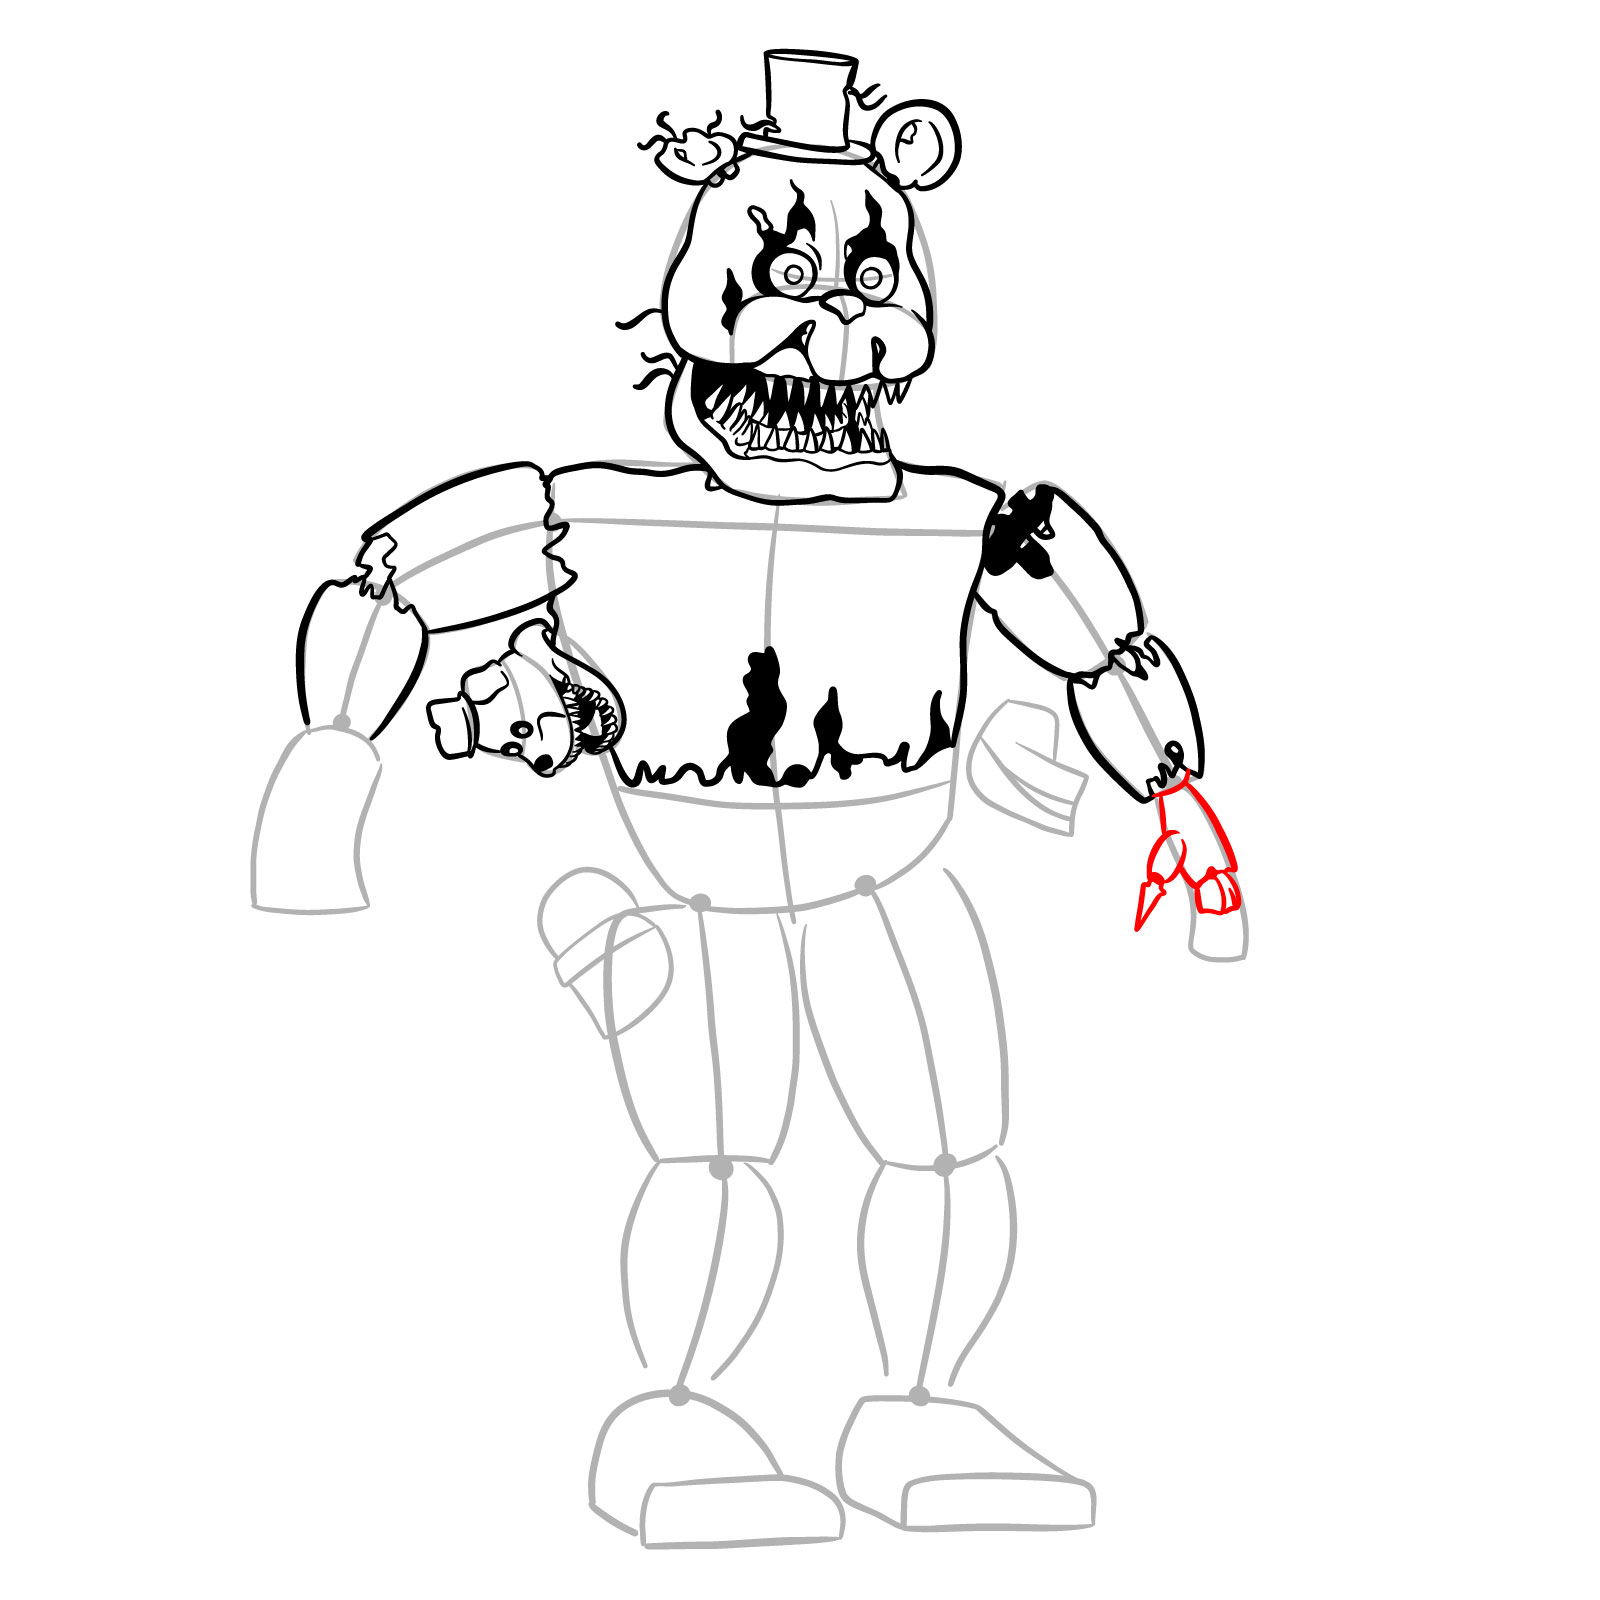 How to draw Nightmare Freddy - step 26